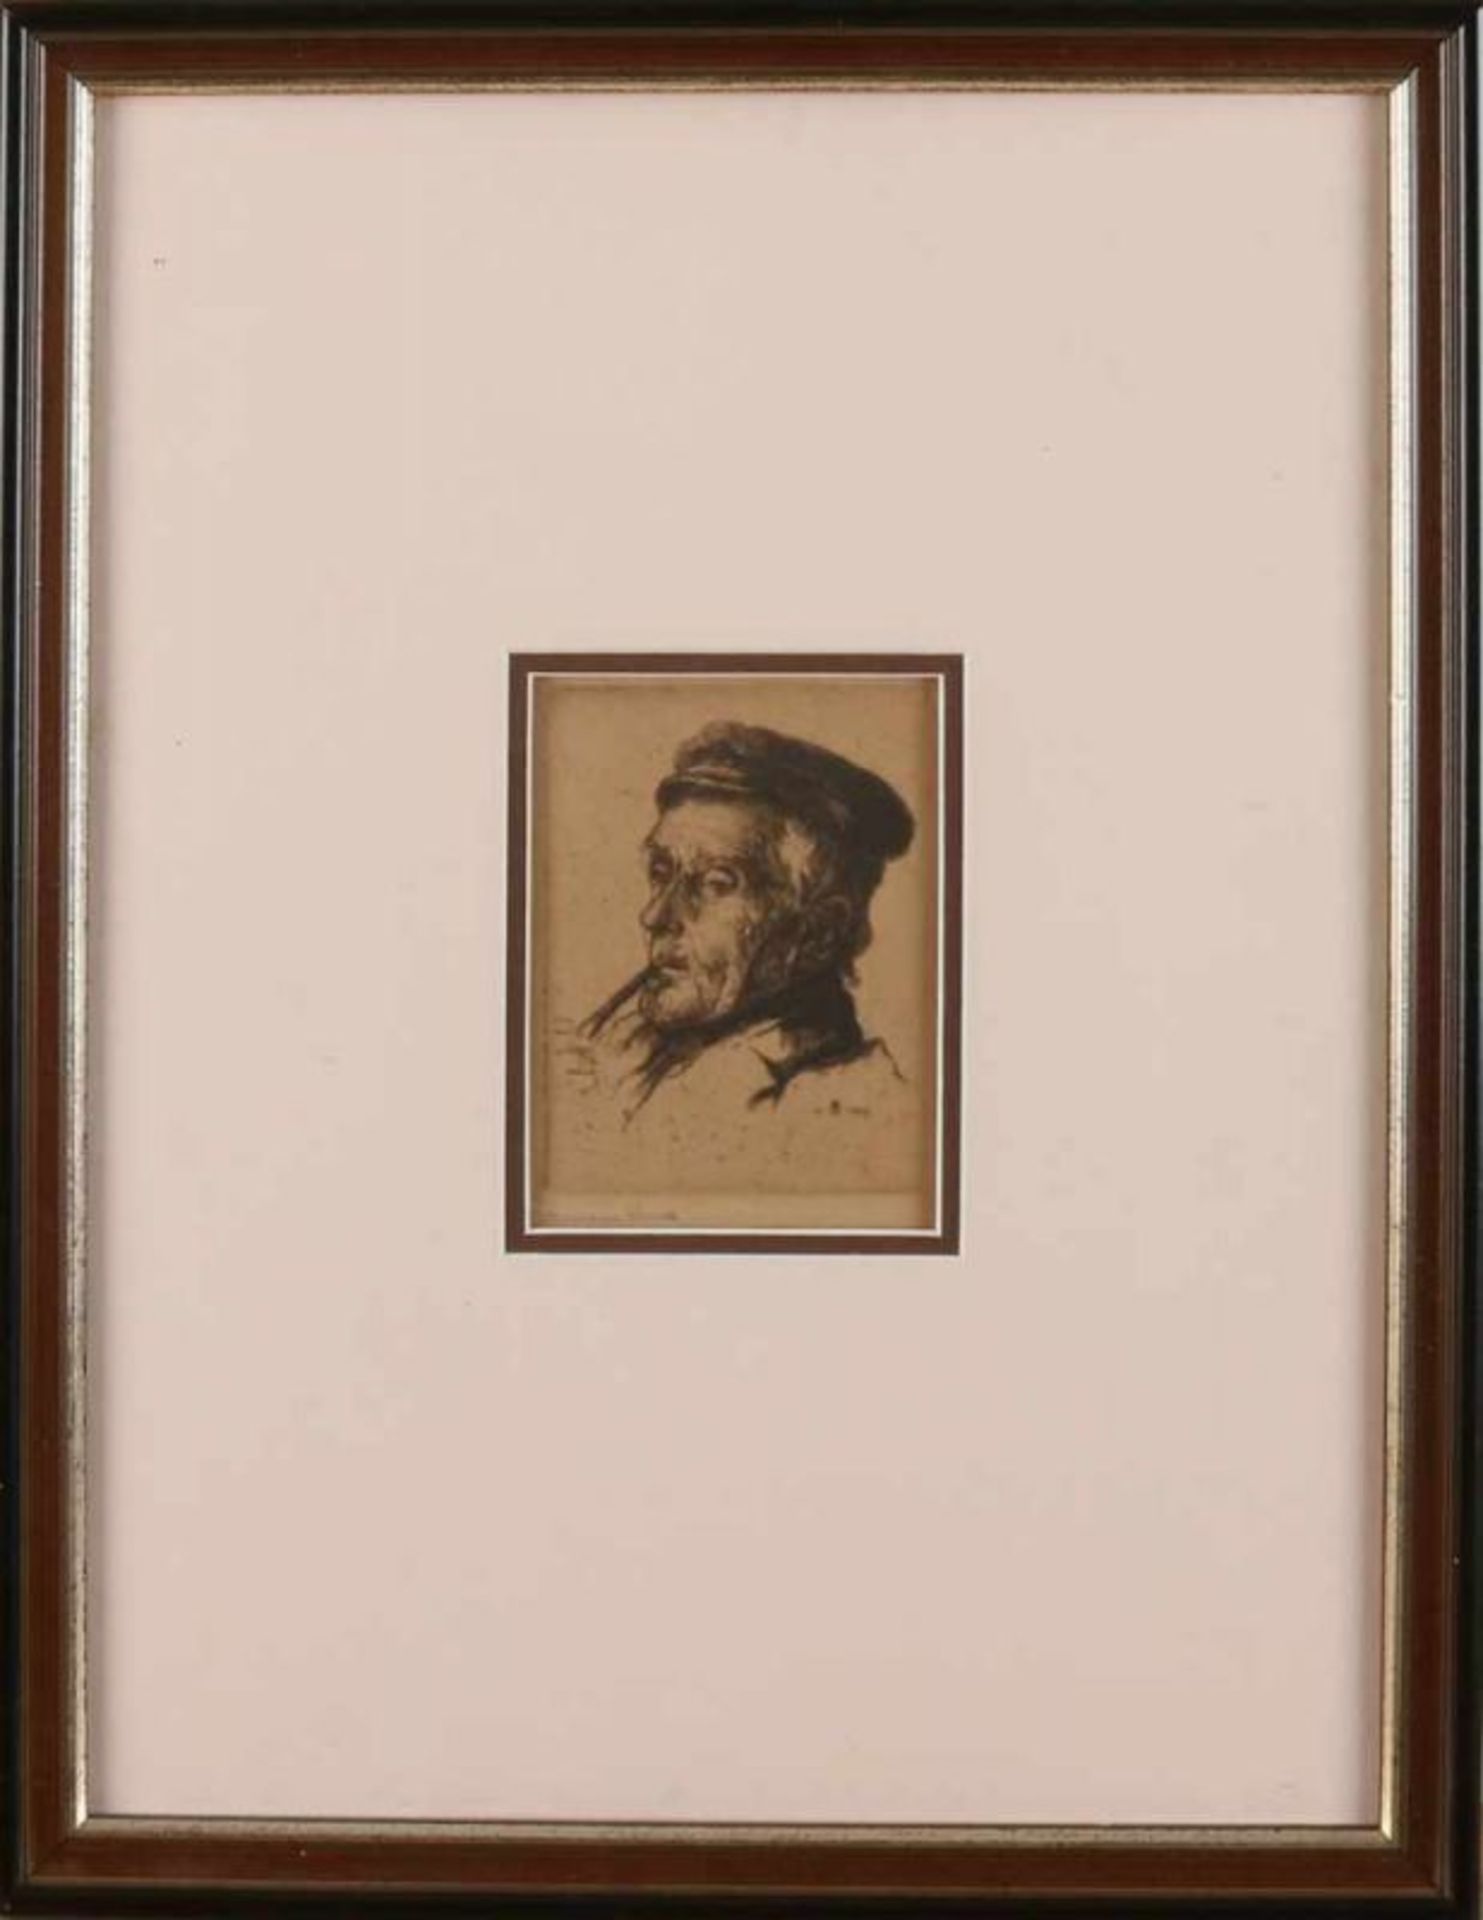 Monogram H.S. 1892. Boer smoke pipe. Etching on paper. Size: 13 x B H 9 cm. In good condition. - Image 2 of 2